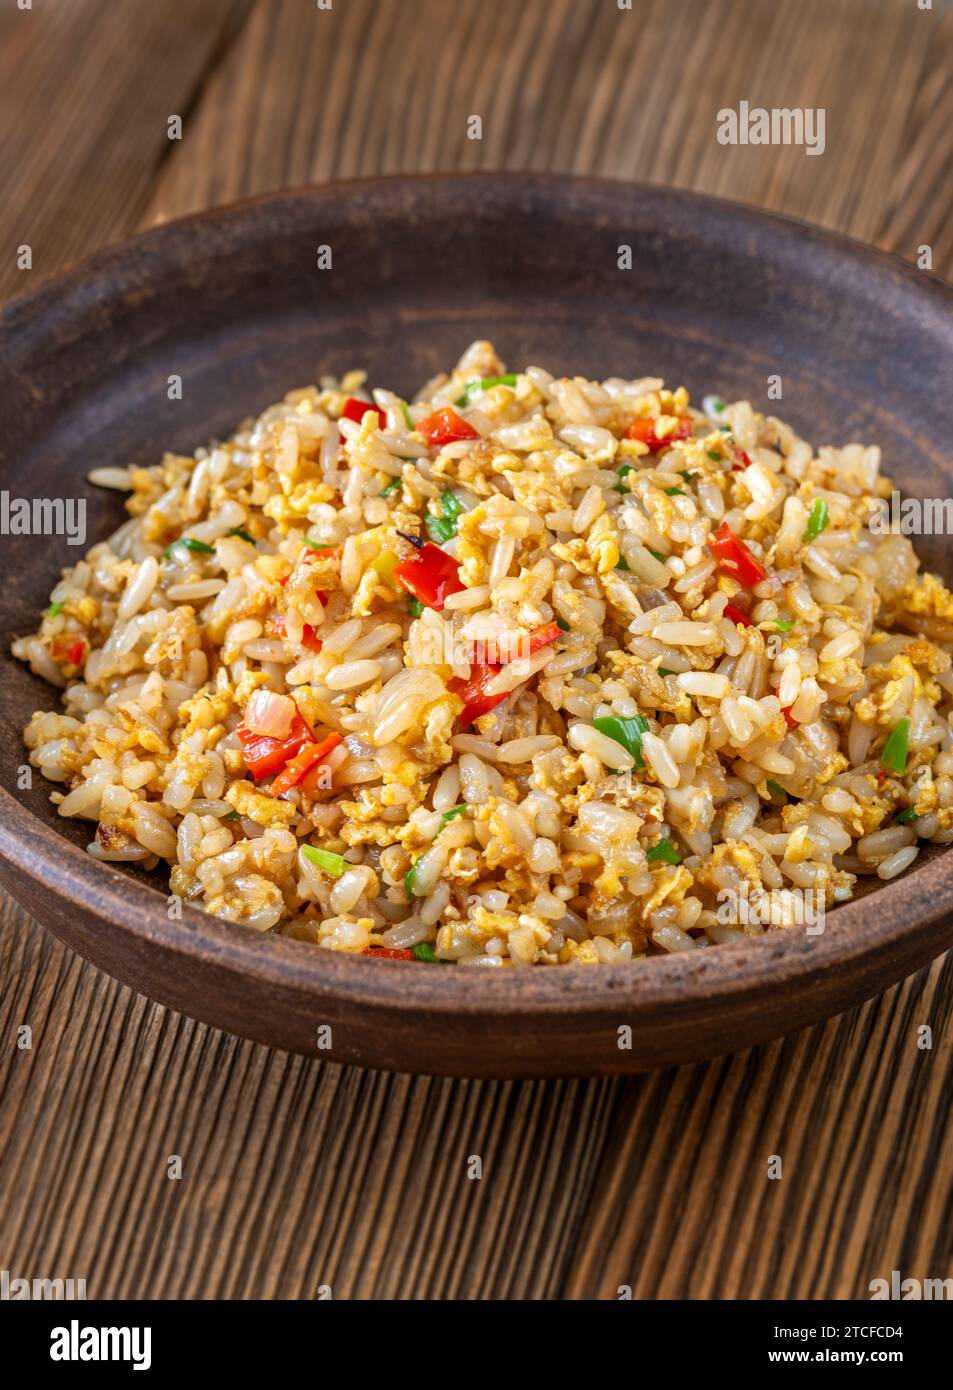 Bowl of traditional egg fried rice on wooden background Stock Photo